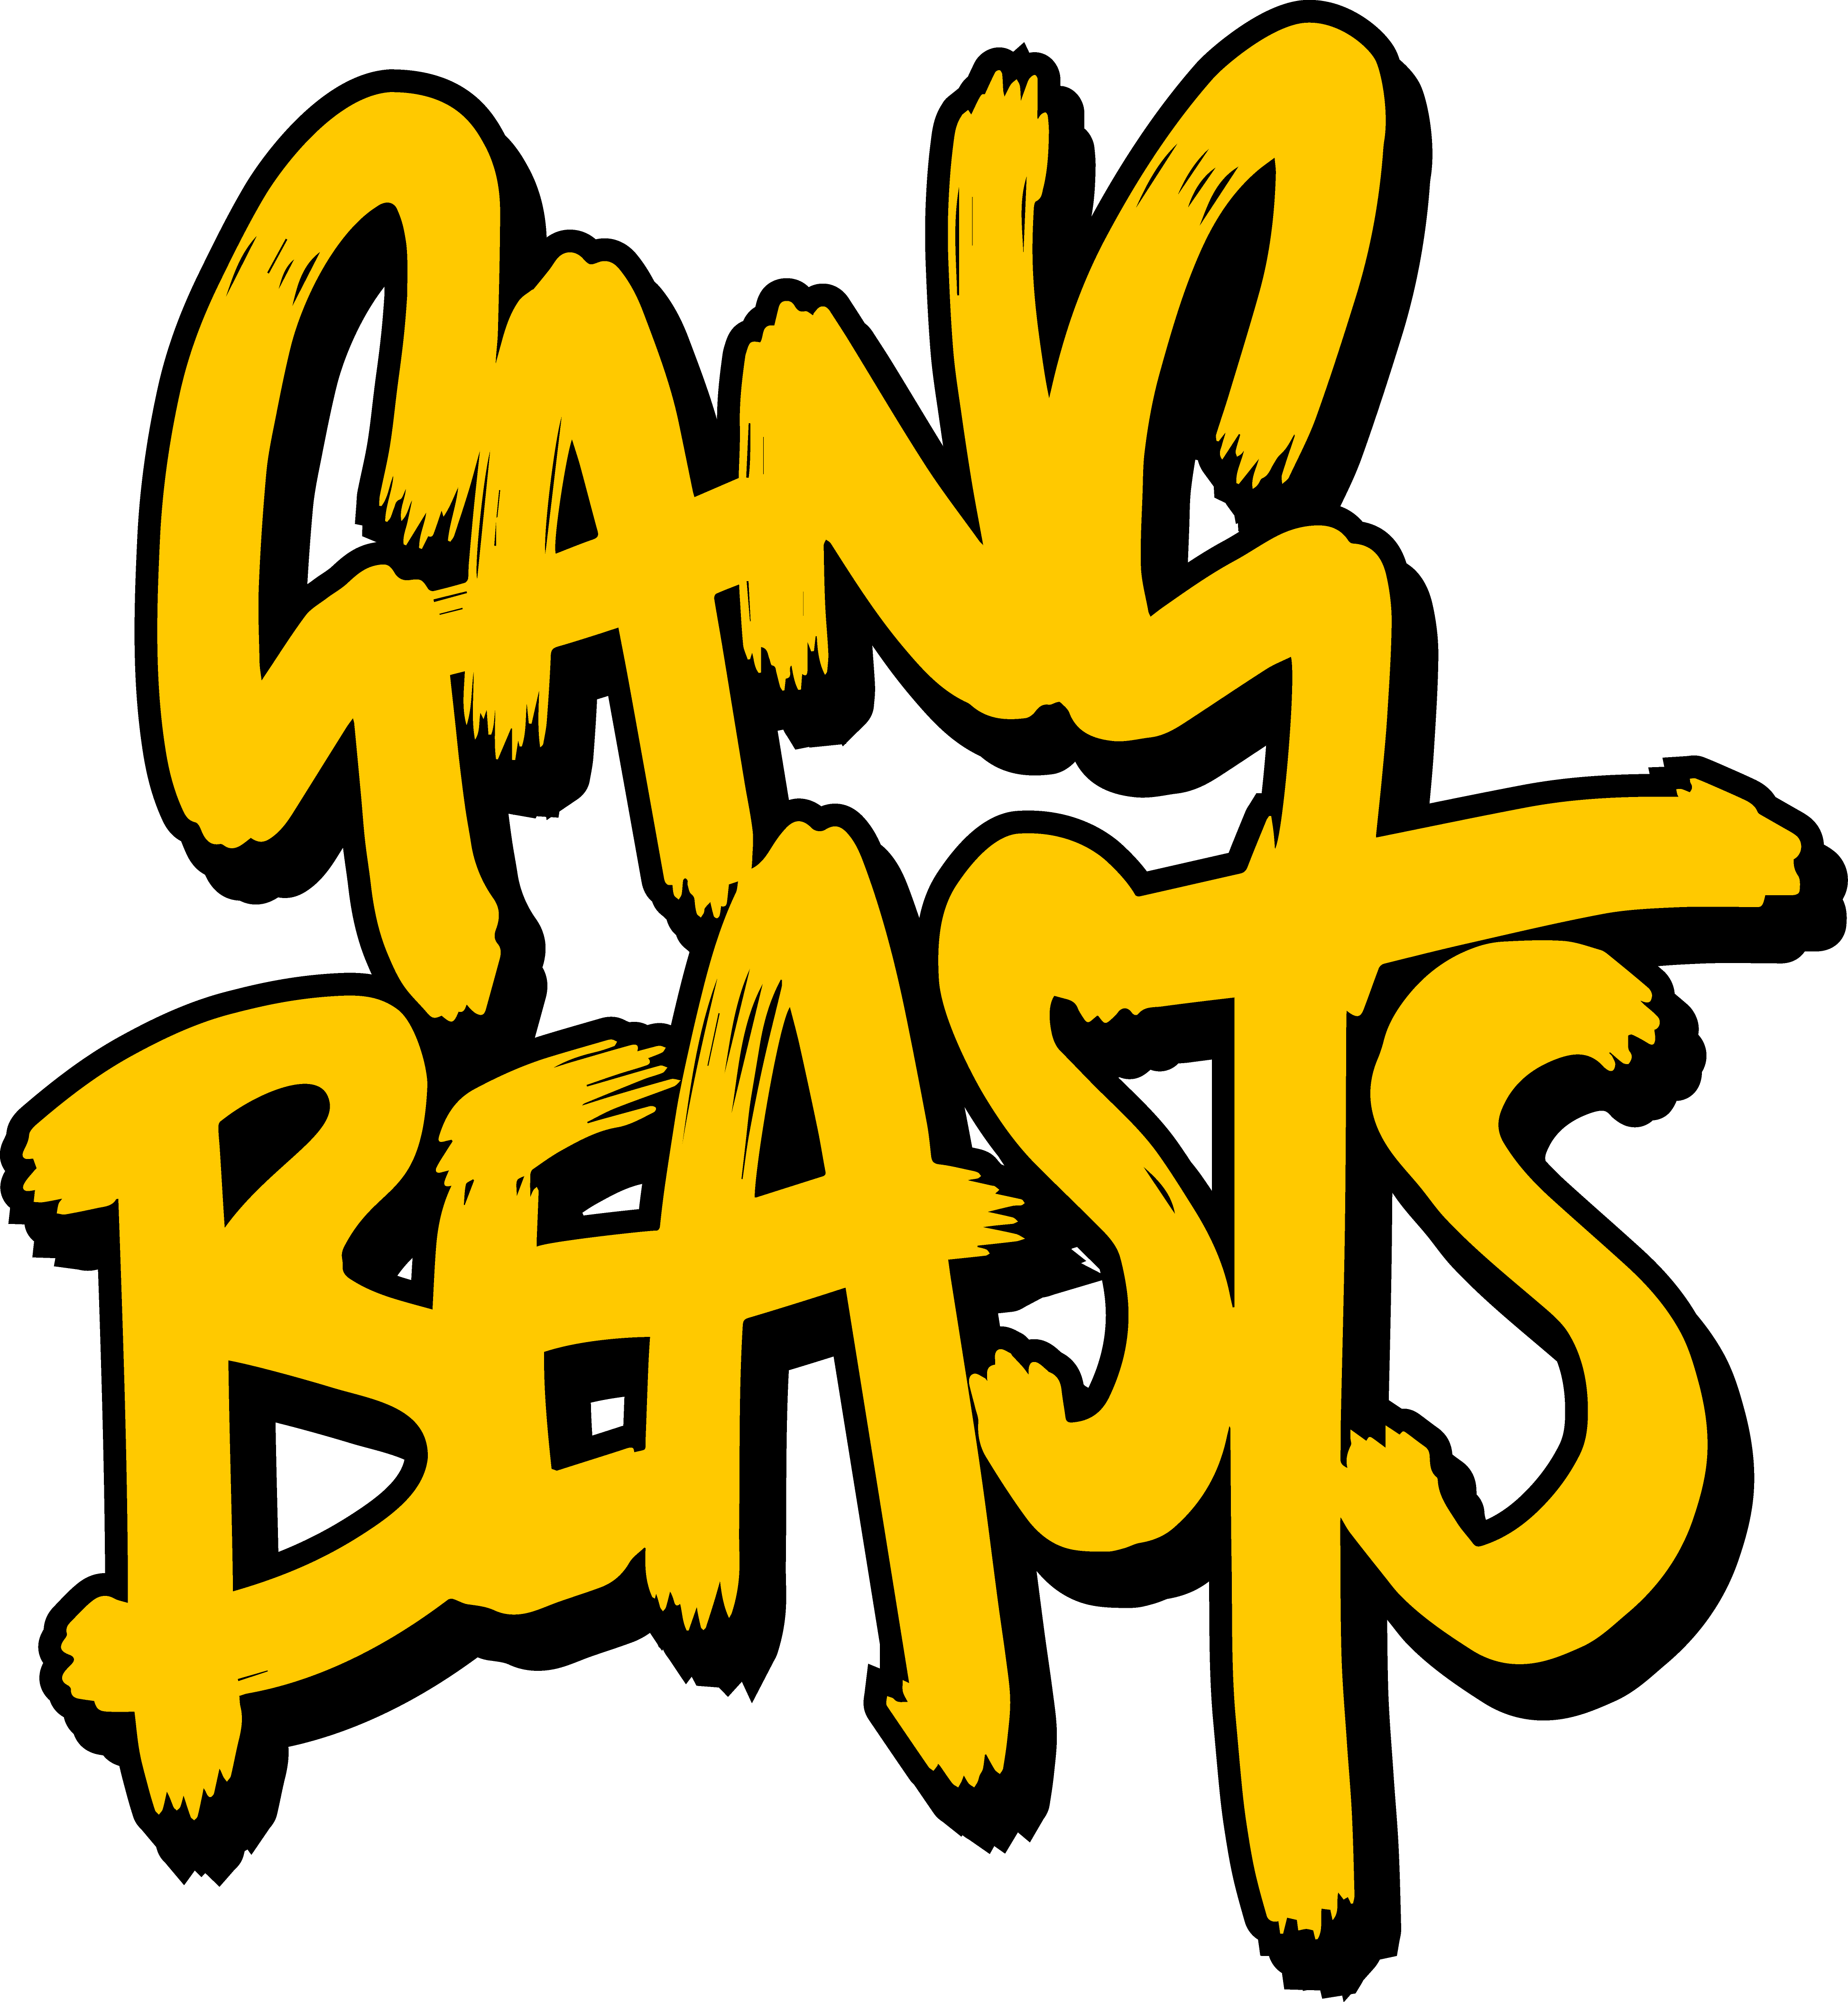 Gang Beasts High Quality Background on Wallpapers Vista